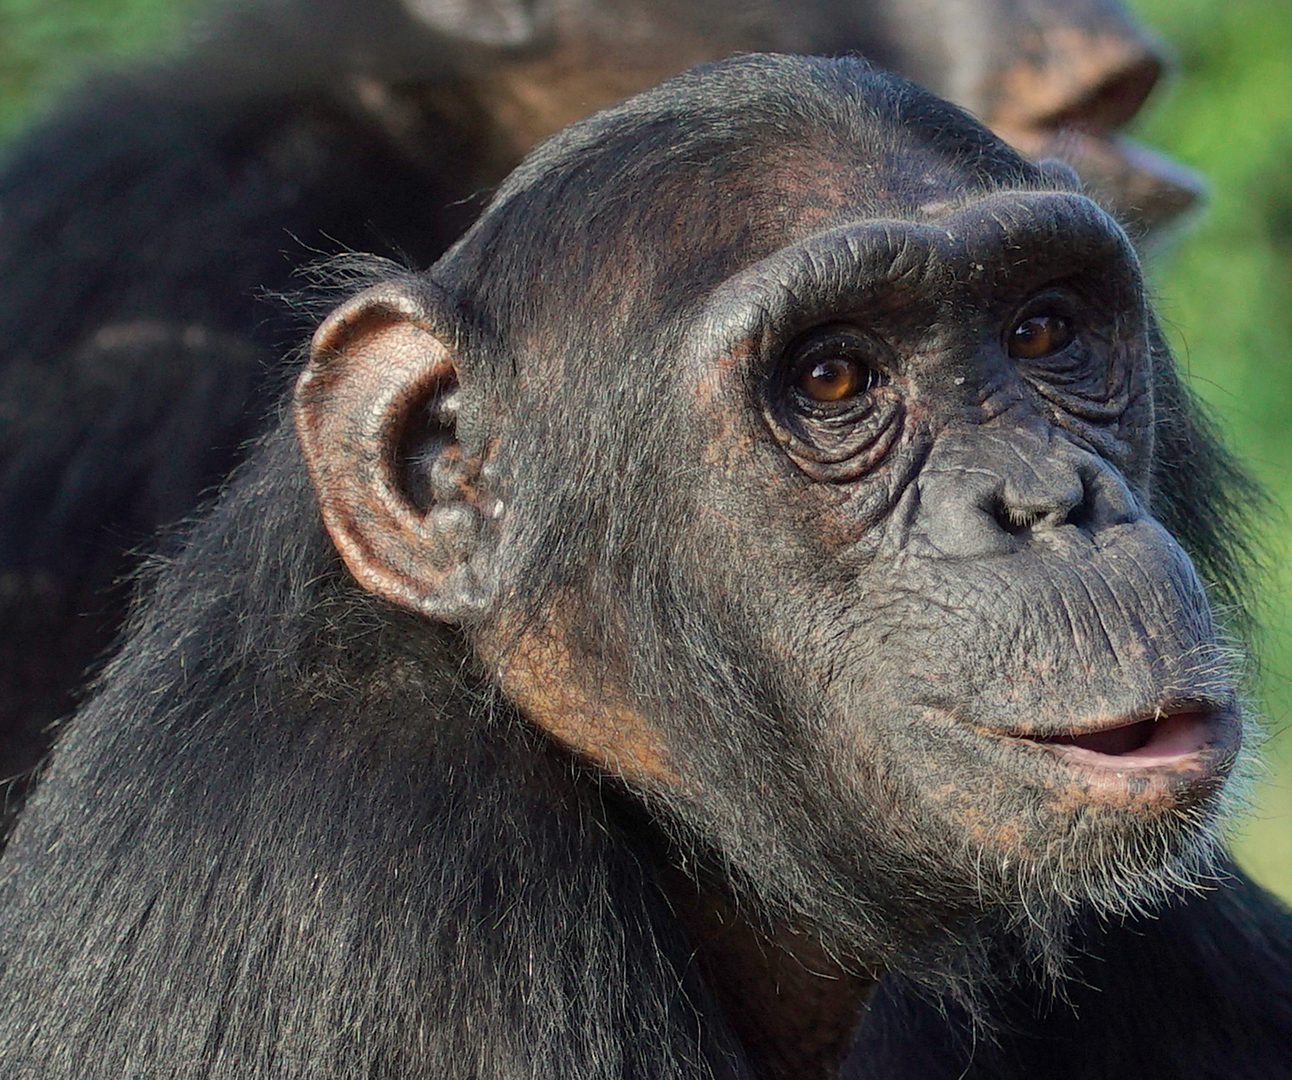 A young chimpanzee looks towards the camera with a second chimpanzee sat behind her